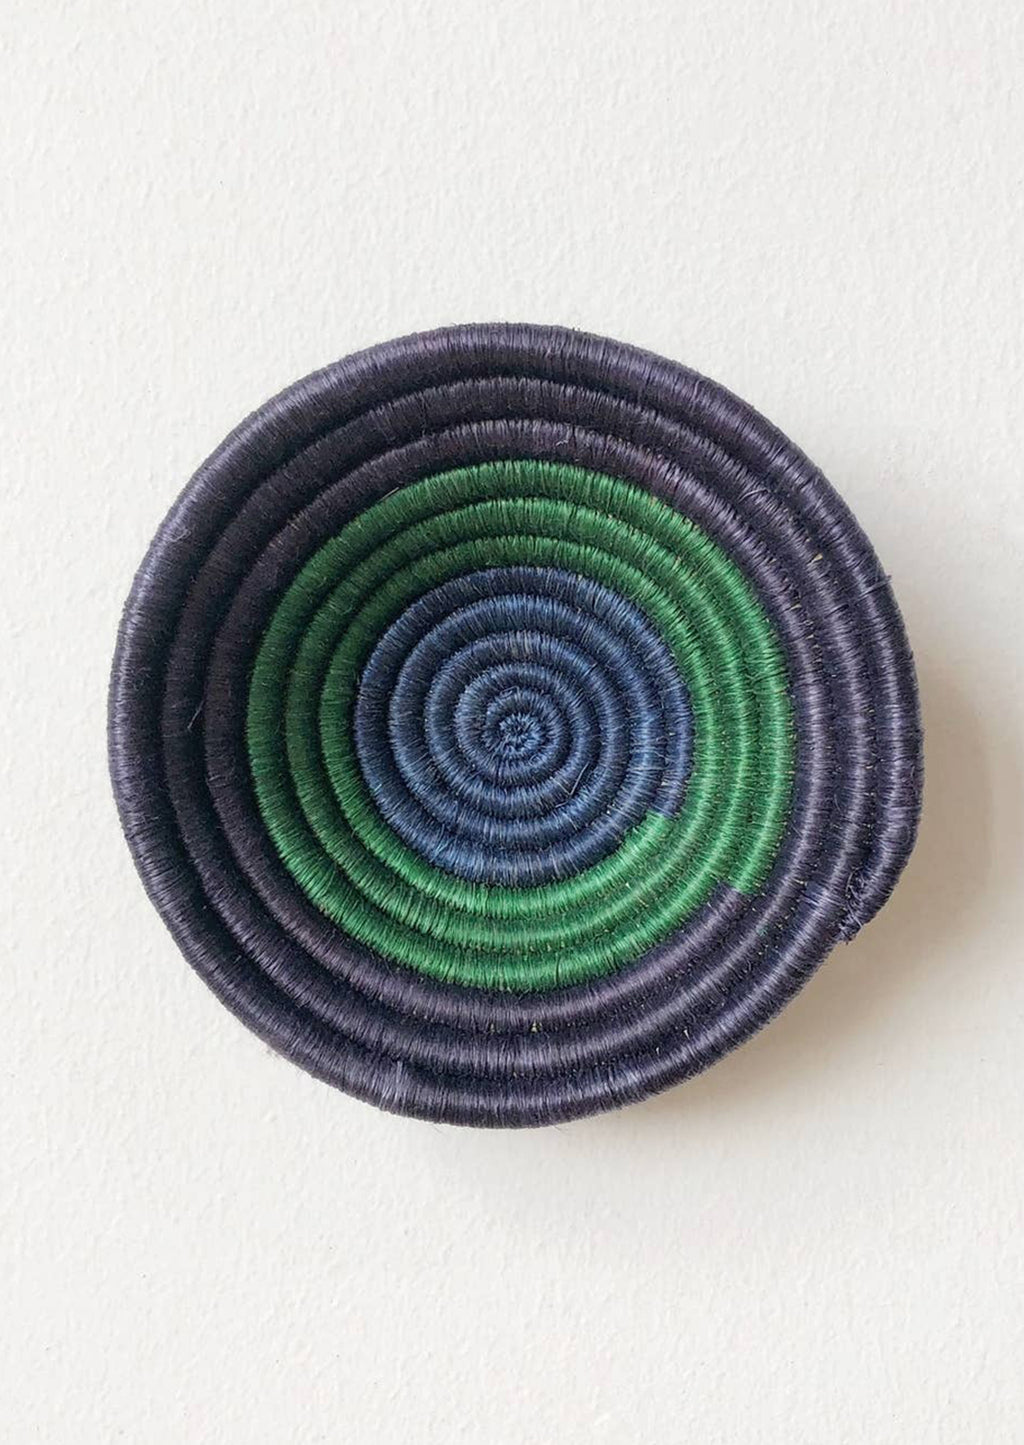 Navy / Kelly Green / Cobalt: A woven sweetgrass bowl in navy and green.